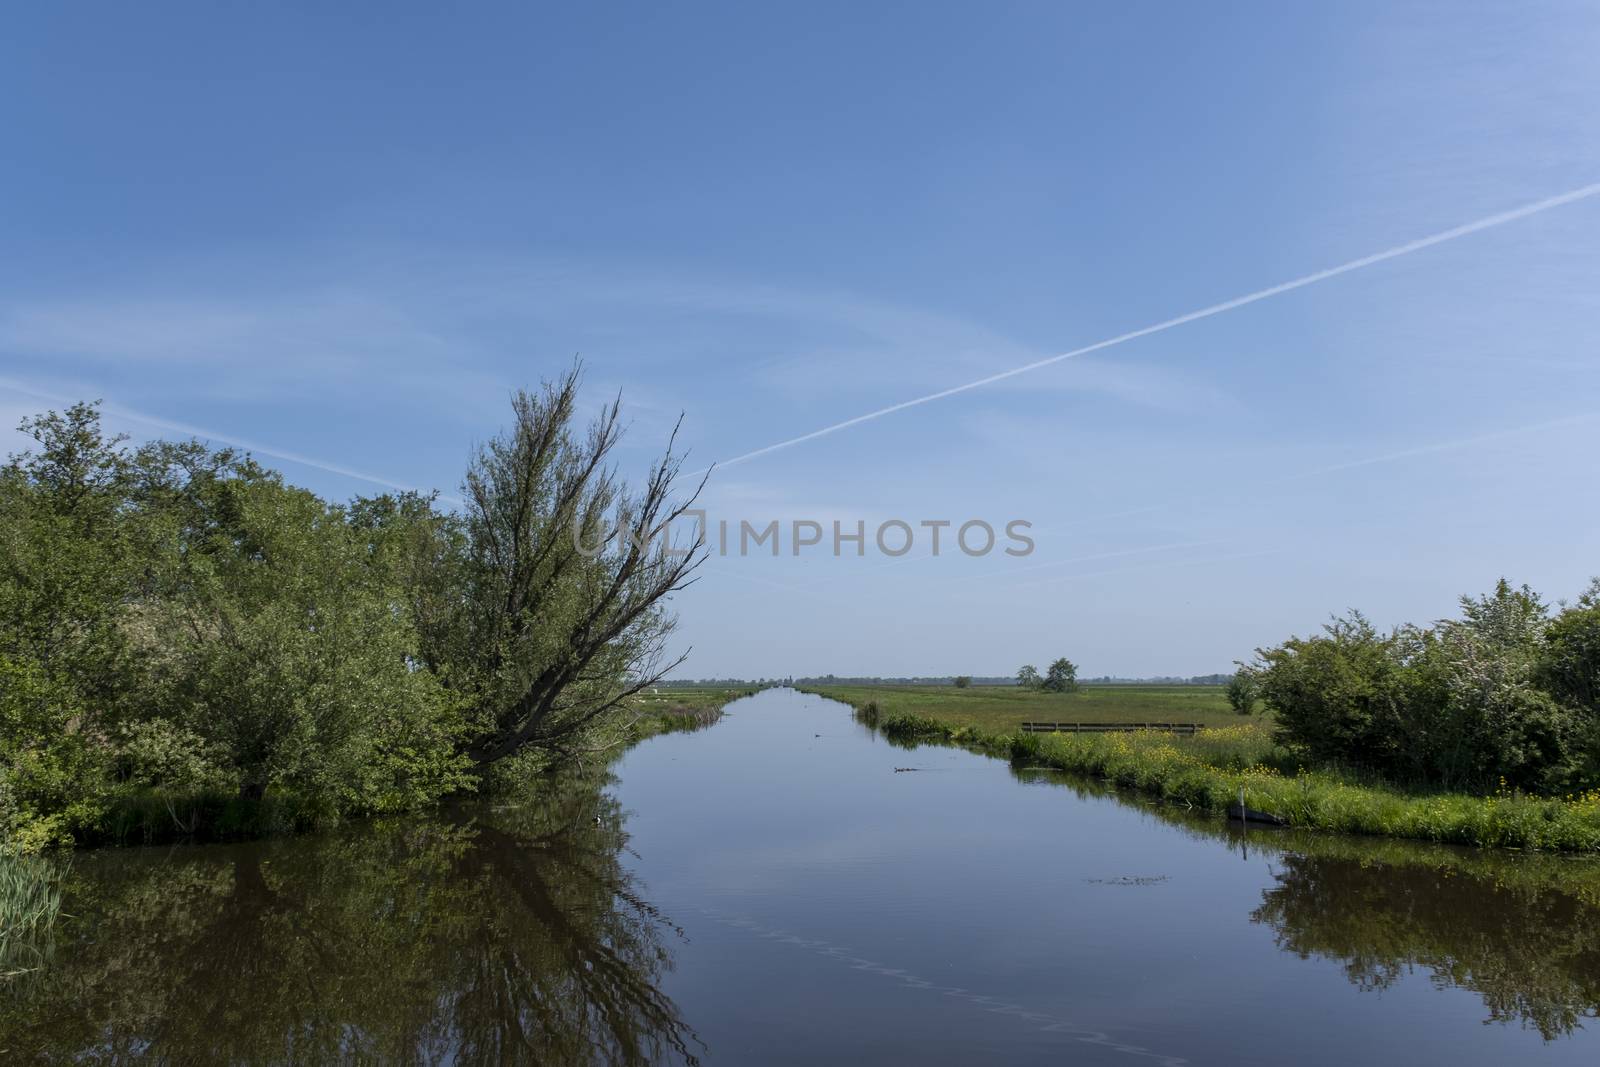 Dutch polder landscape early in the morning on a sunny day in the spring season